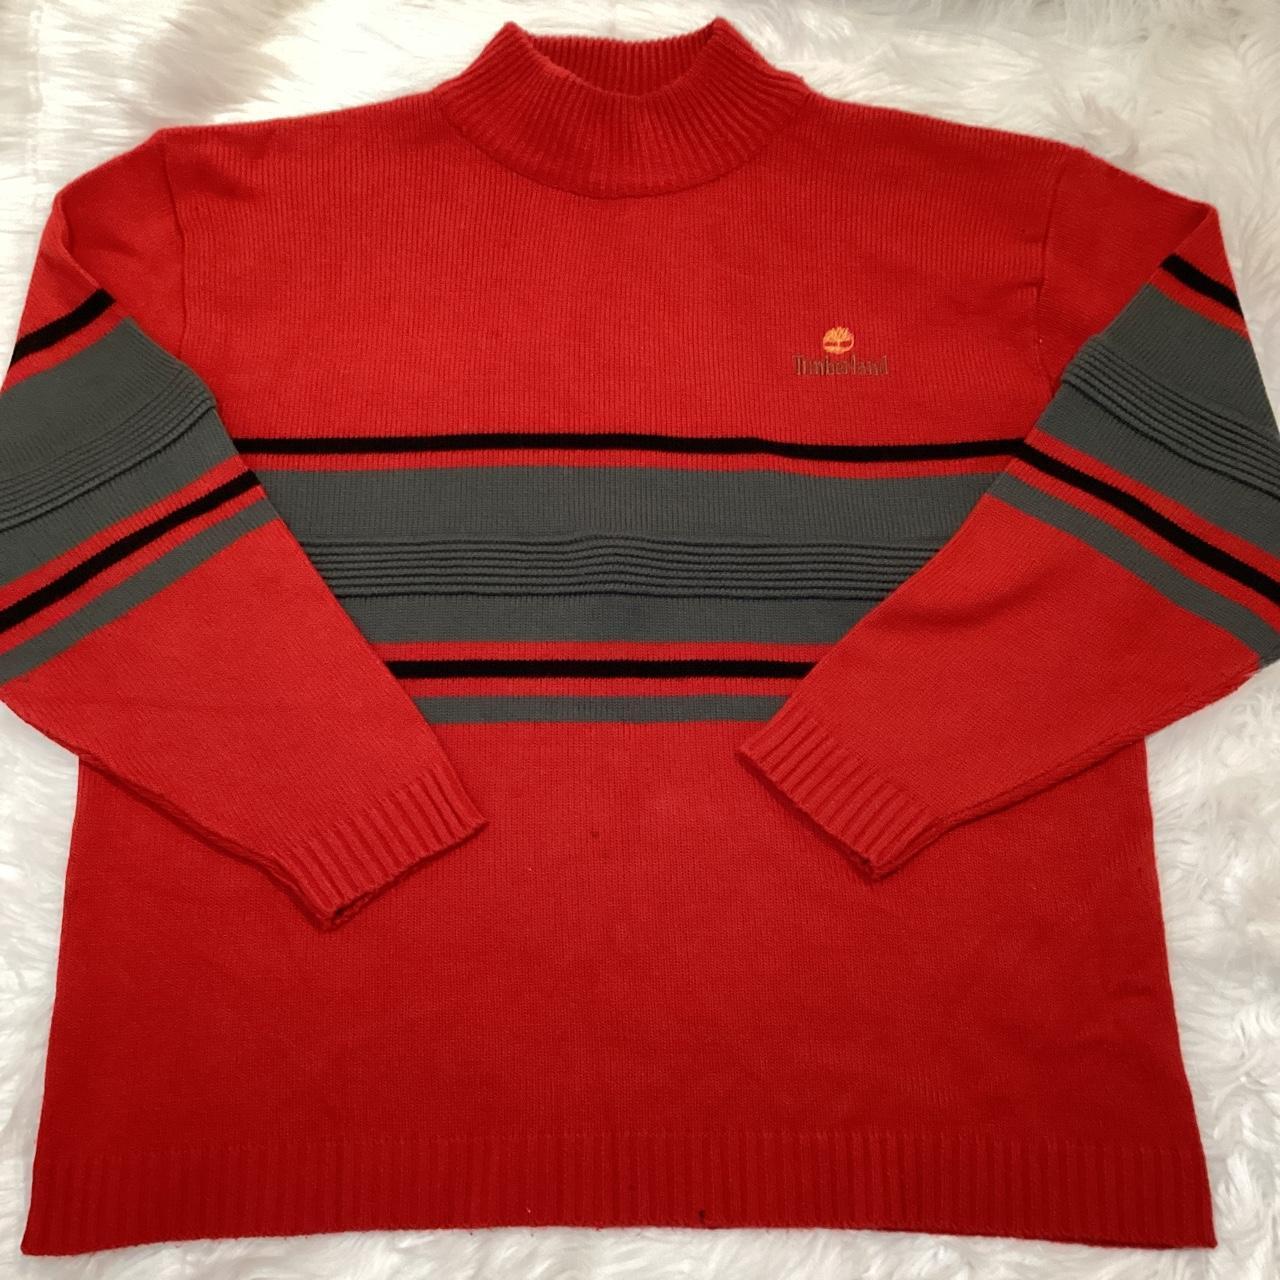 Timberland Men's Red and Grey Jumper